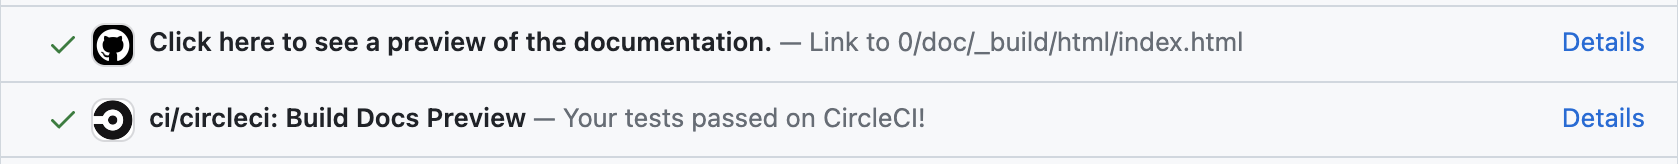 Link saying "Click here to see a preview of the documentation." from a SymPy
pull request CI checks listing